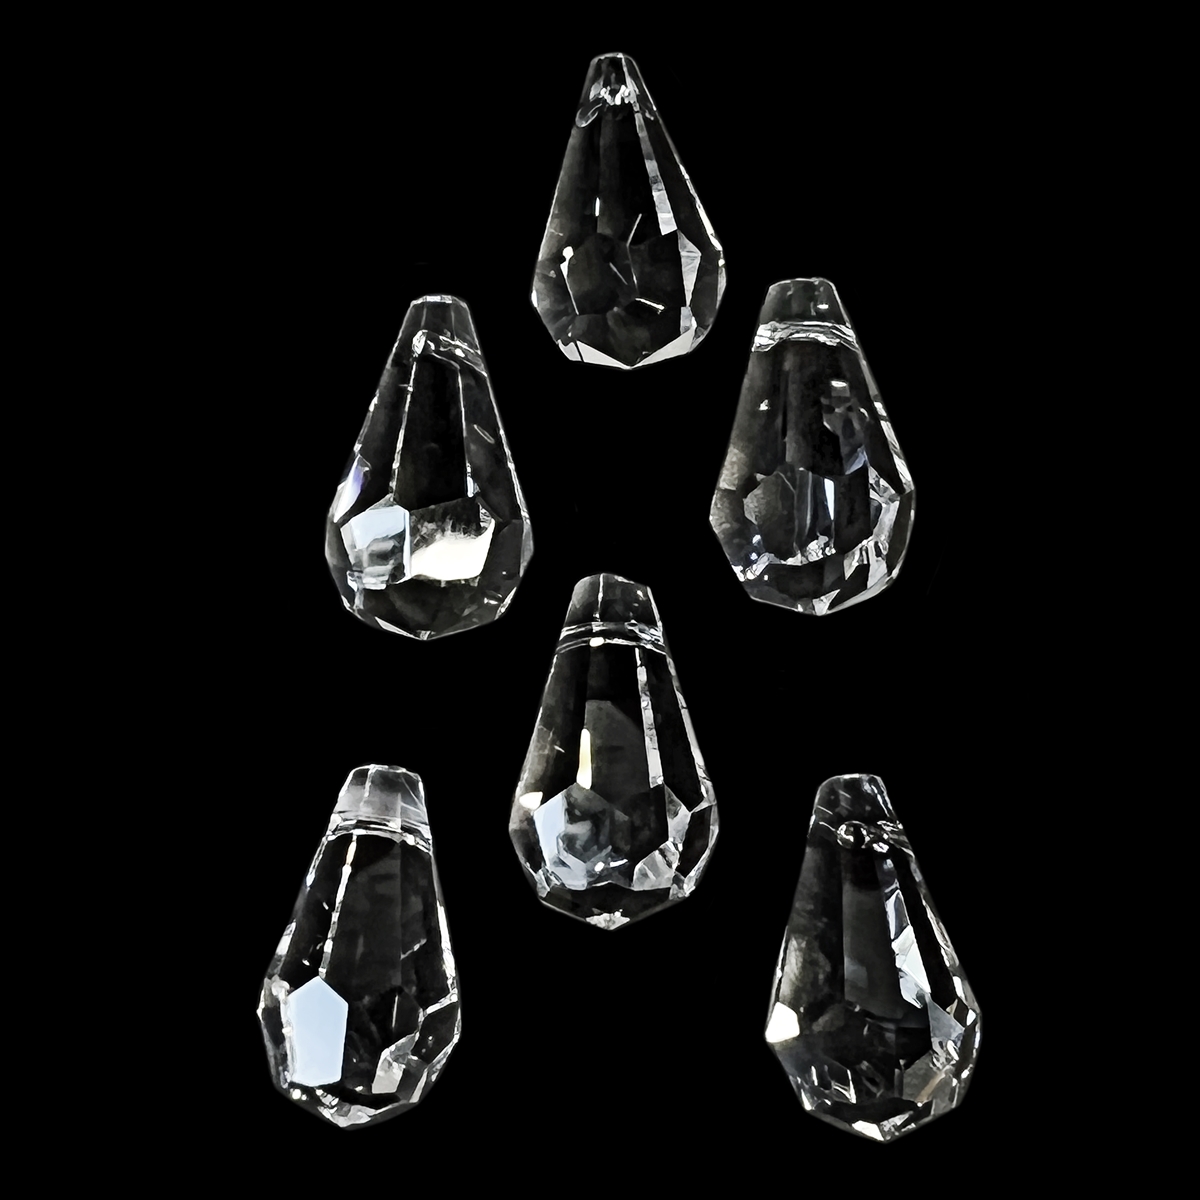 1 Box Loose Czech Drilled Briolette Cut Glass Beads for Jewelry Making 10  Color Faceted Teardrop Pear Crystal Beads Light AB Glass Teardrop Pear Beads  Loose Spacer Crystal Beads for Jewelry Making